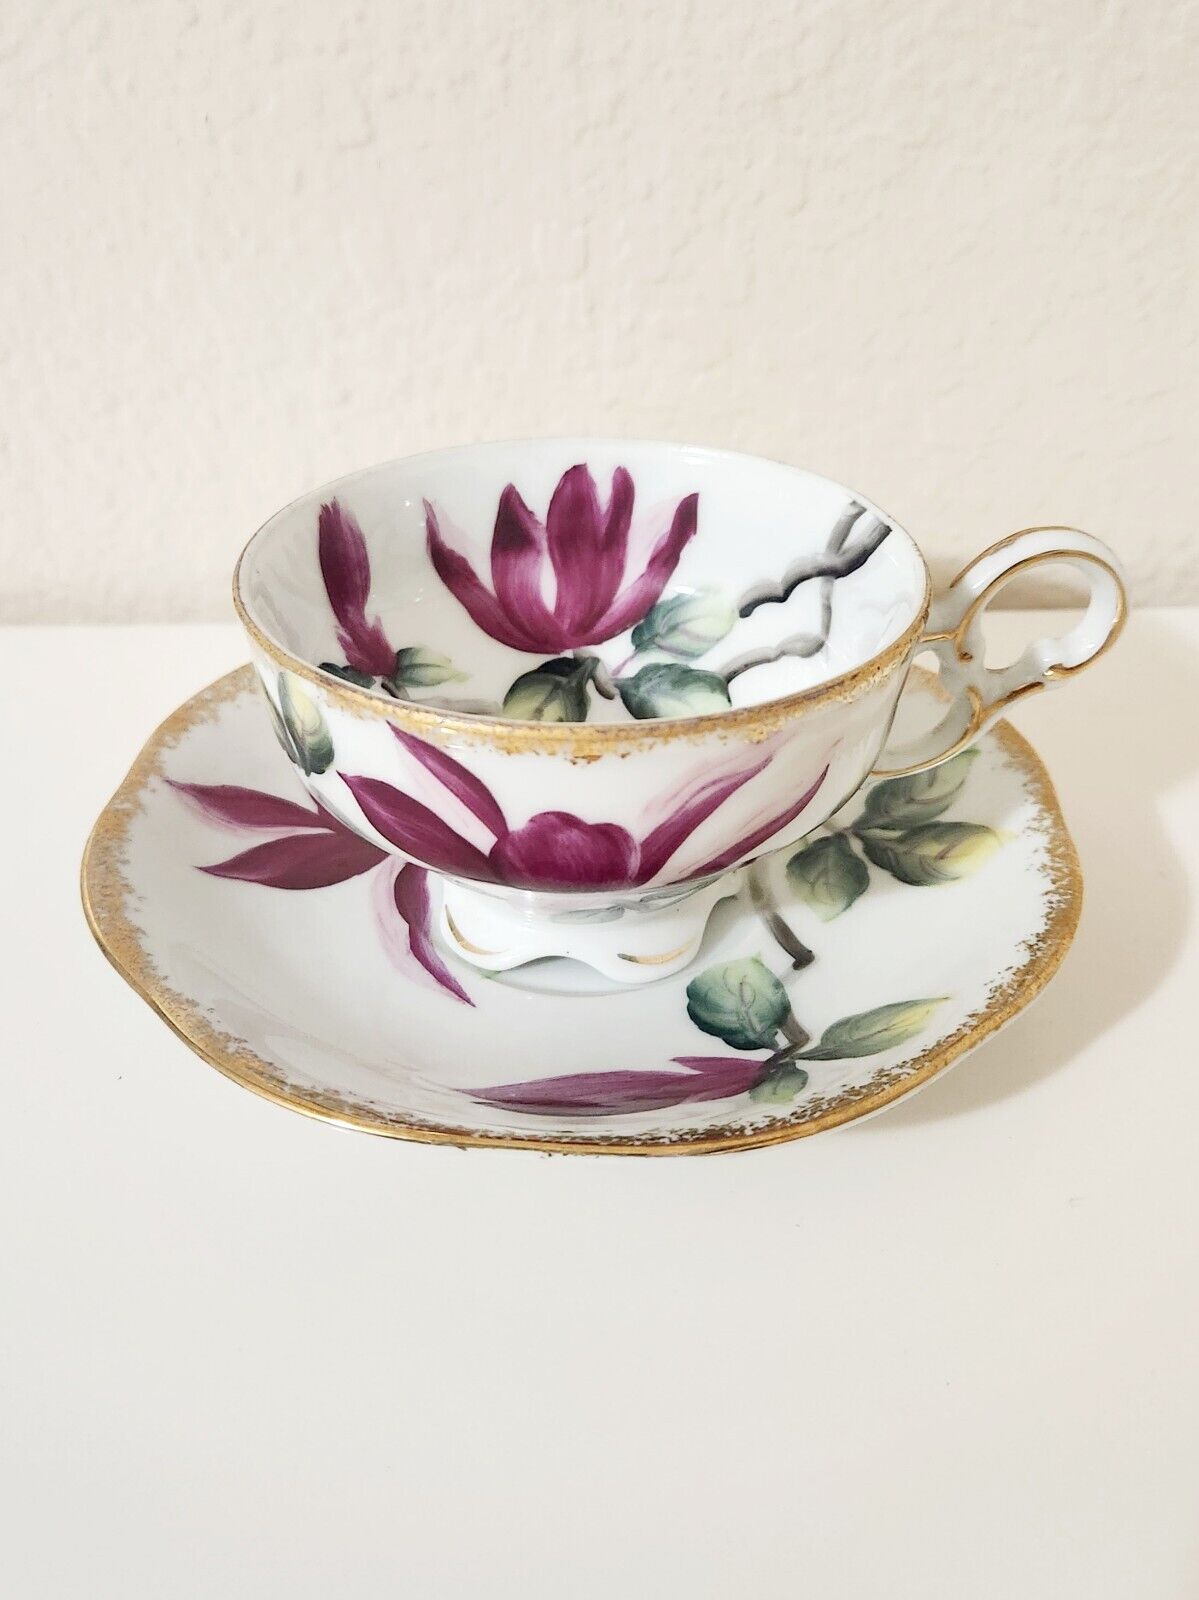 Hand Printed Vintage Antique Floral Collectible Small Tea Cup & Saucer Set